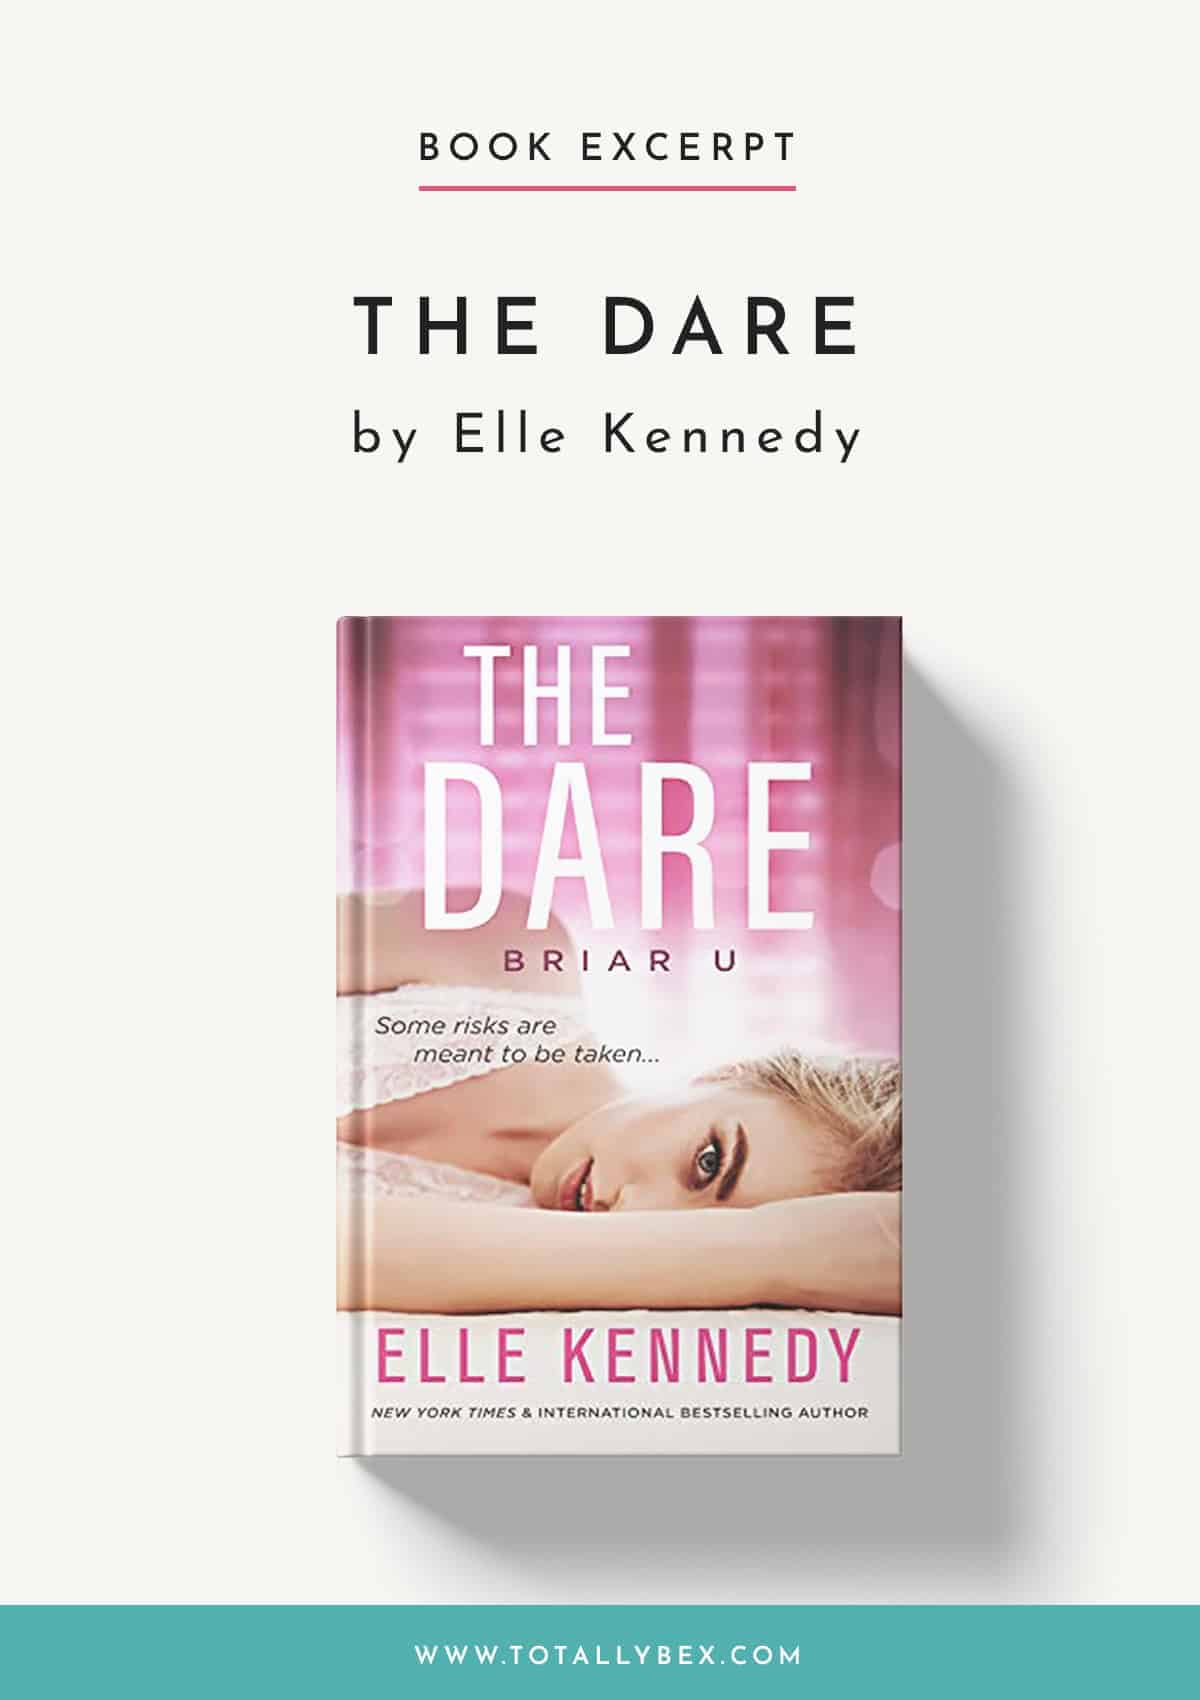 THE DARE is the fourth interconnected standalone book set in Elle Kennedy's binge-worthy Briar U series!  Enjoy this sneak peek from the story!